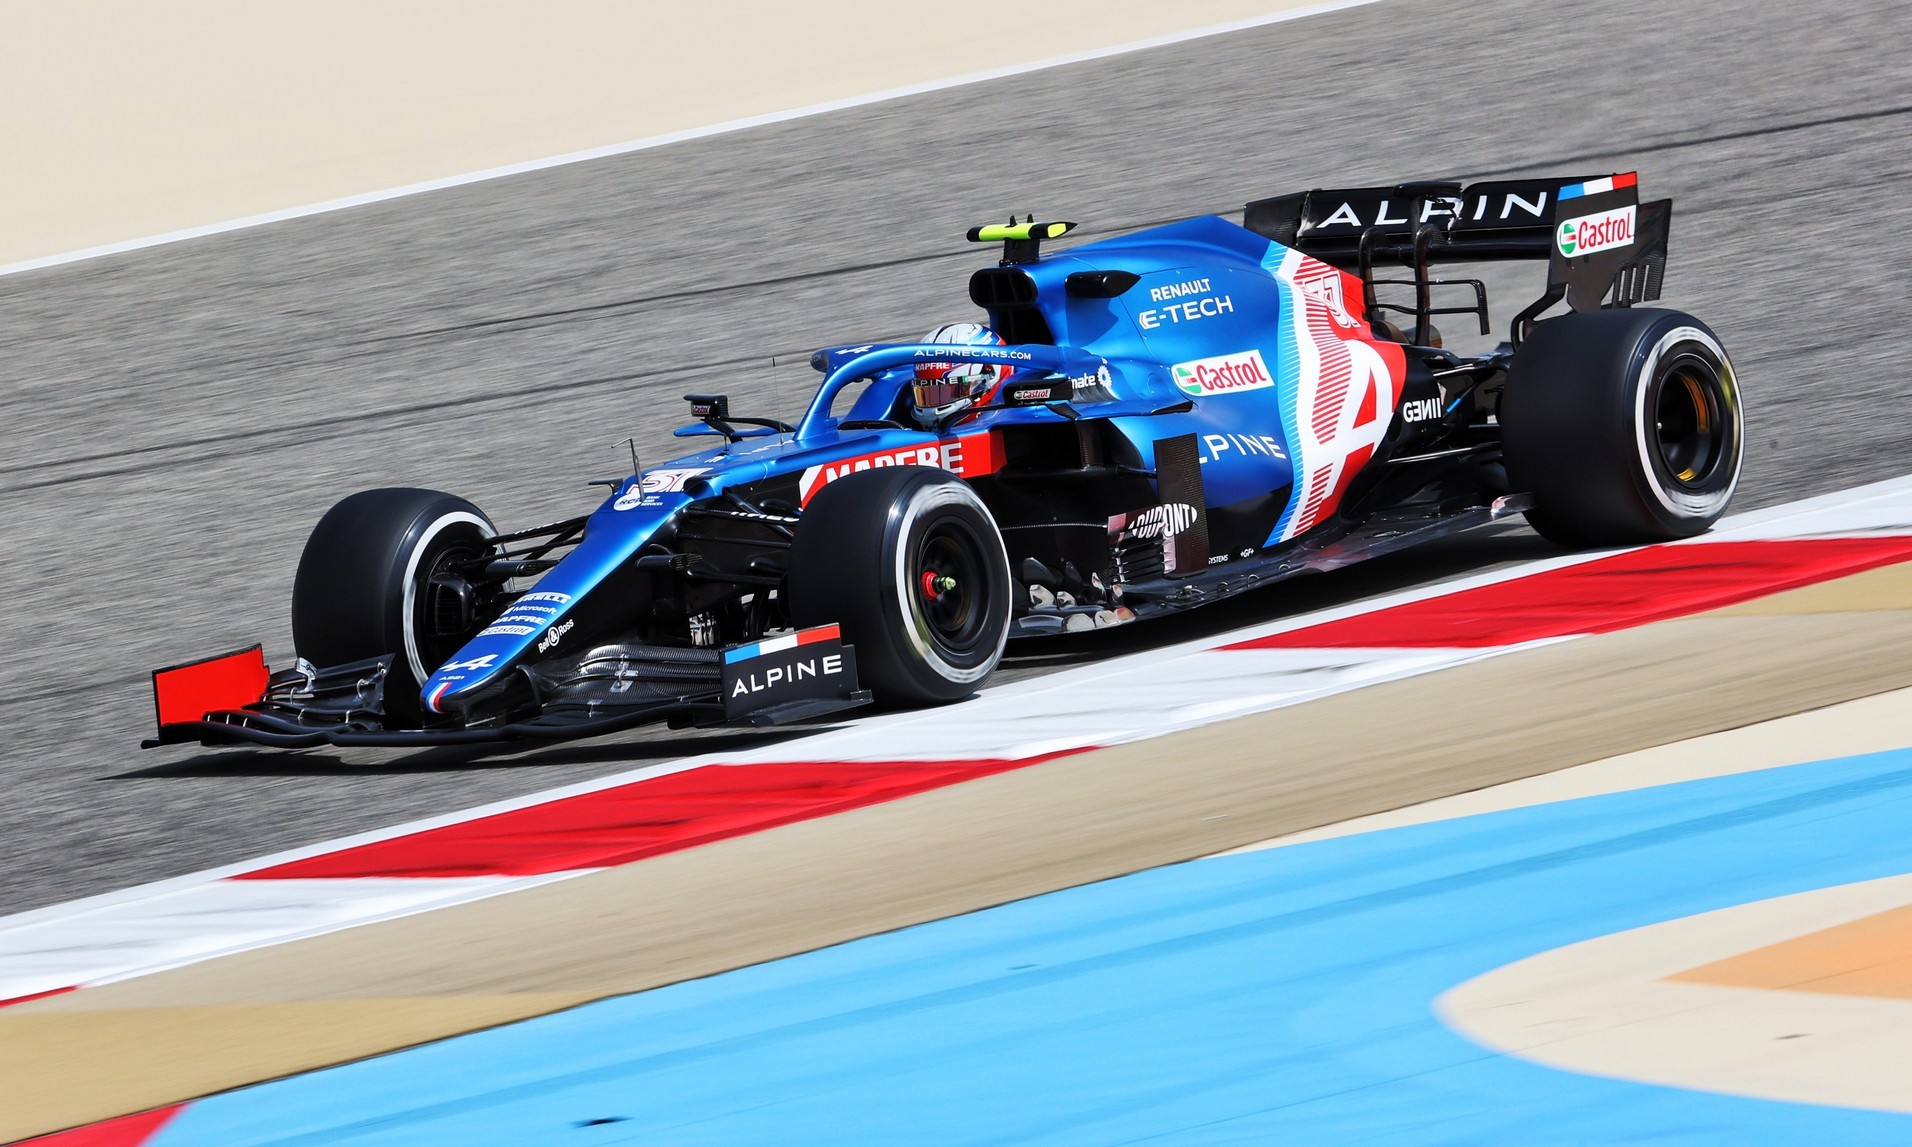 Alpine will be giving Ocon a brand new chassis for Silverstone